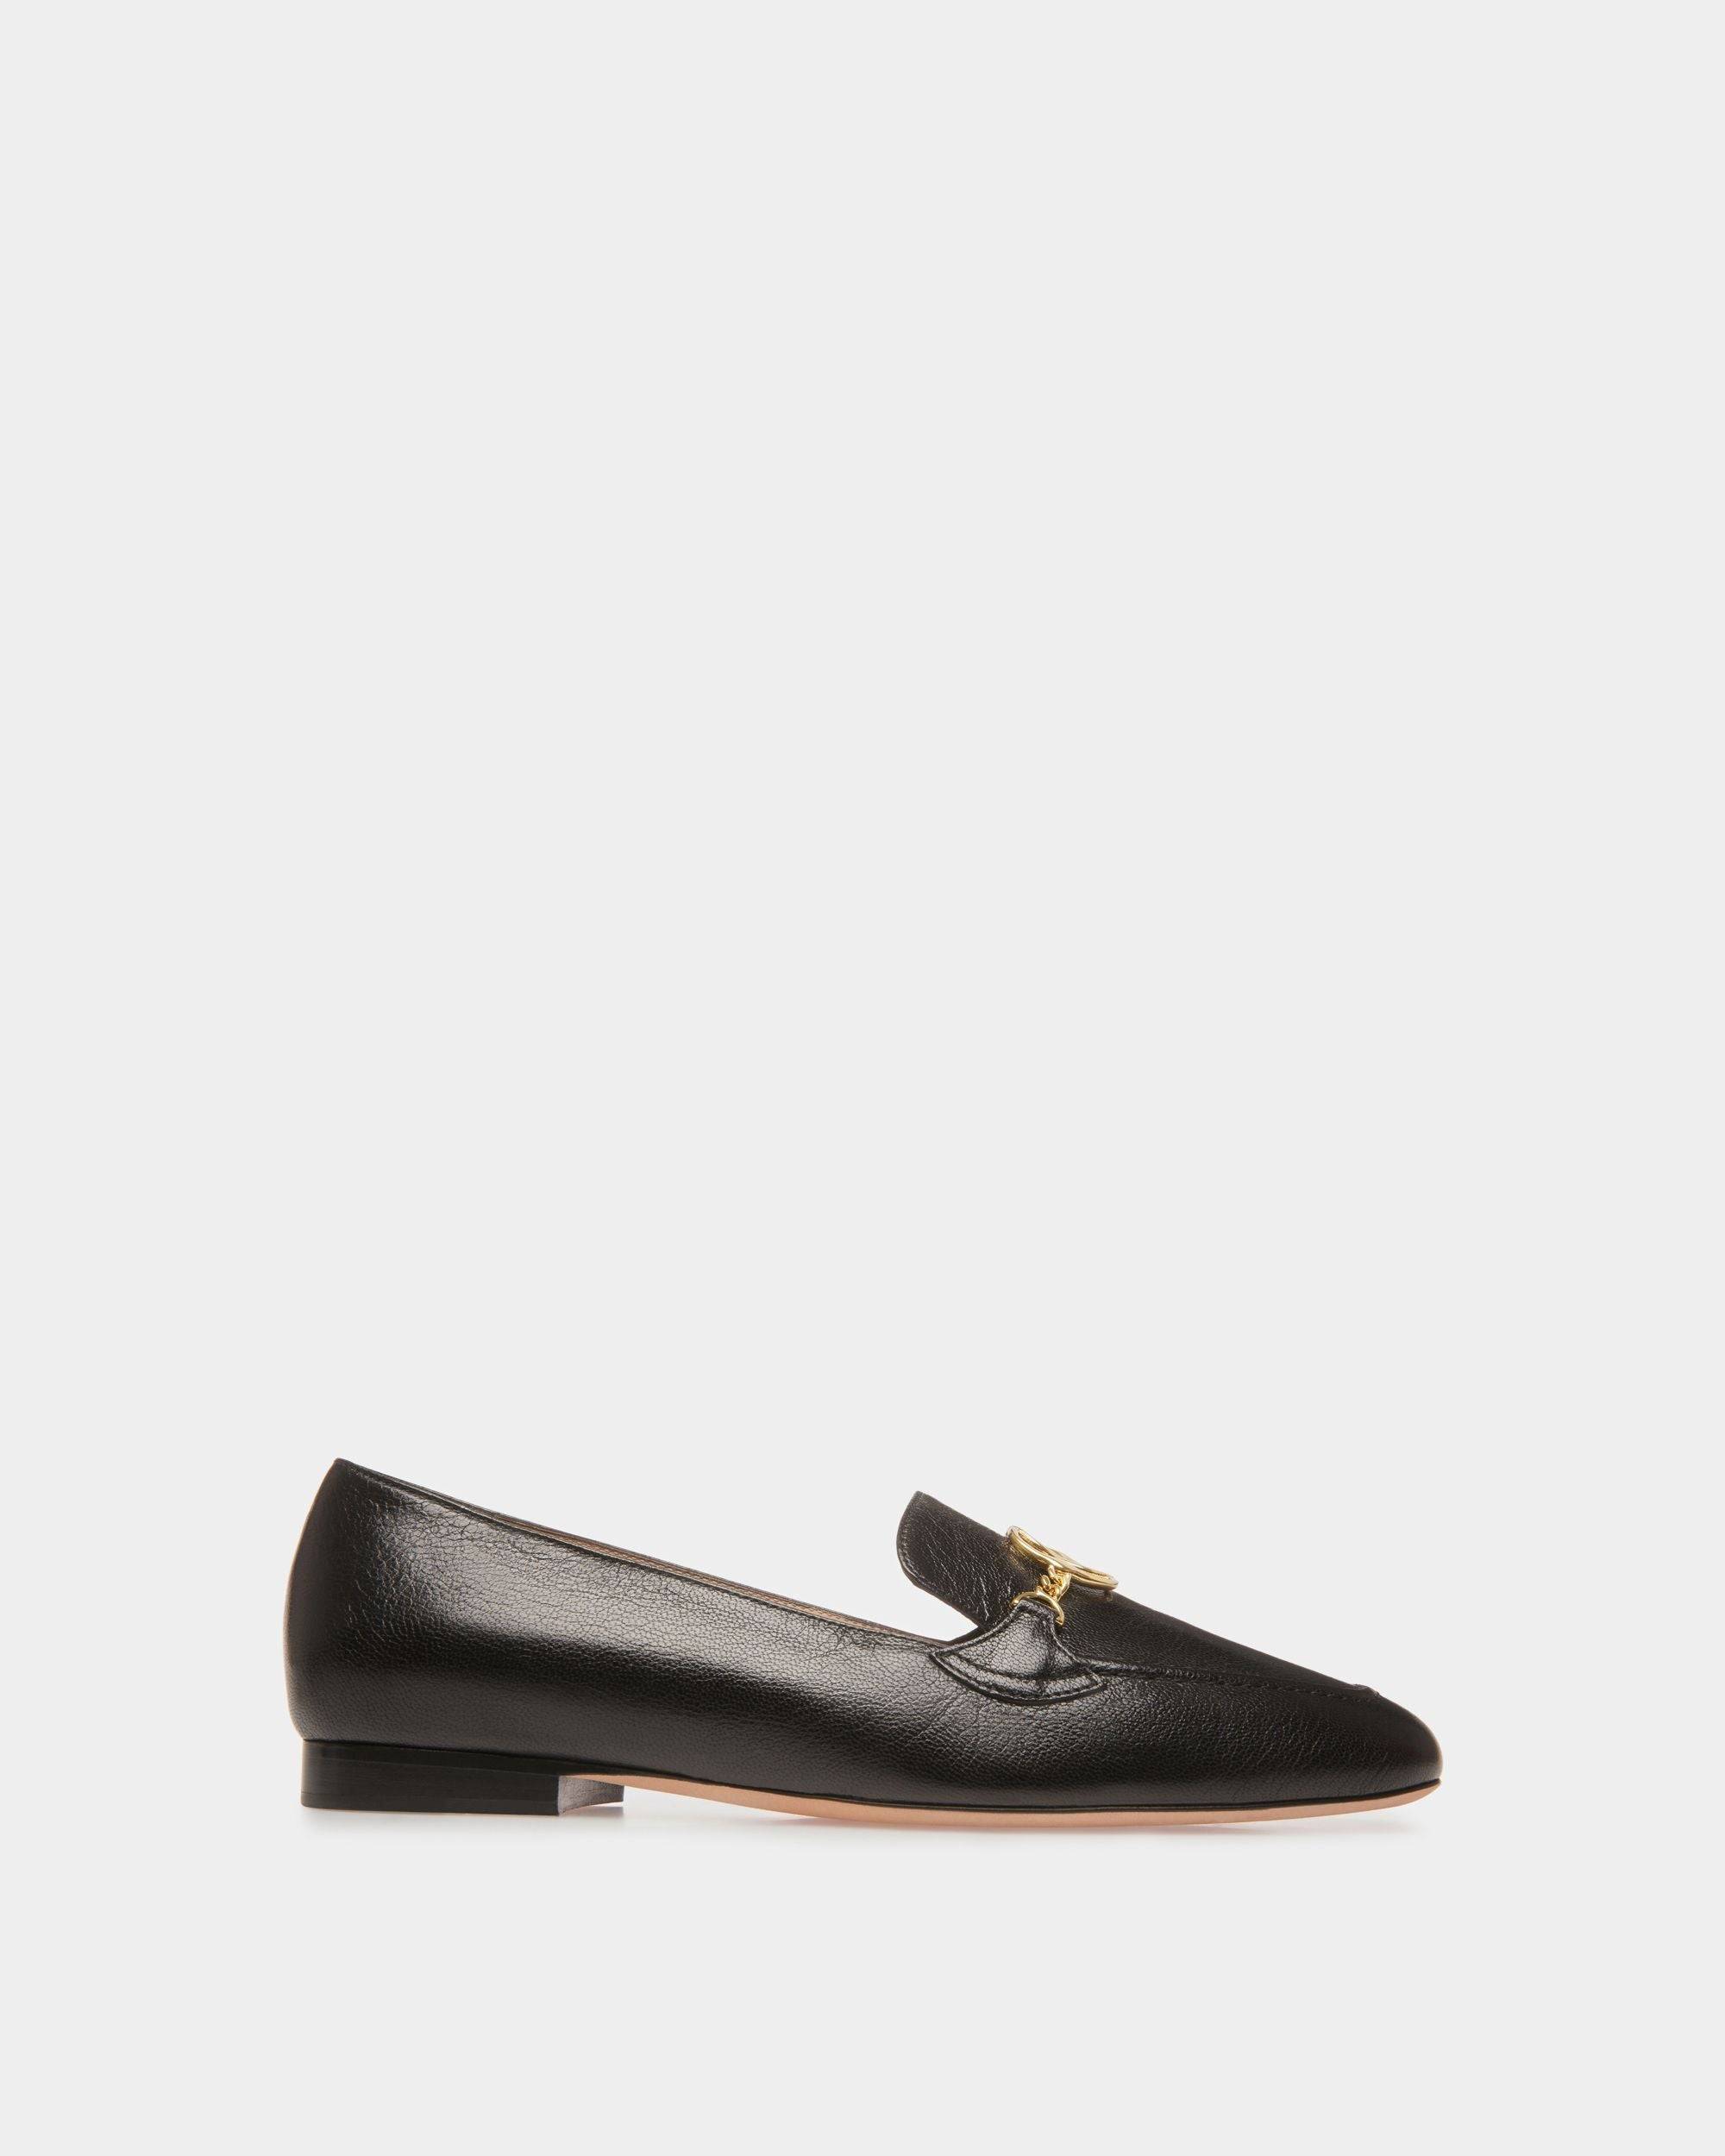 Women's Daily Emblem Loafers In Black Leather | Bally | Still Life Side